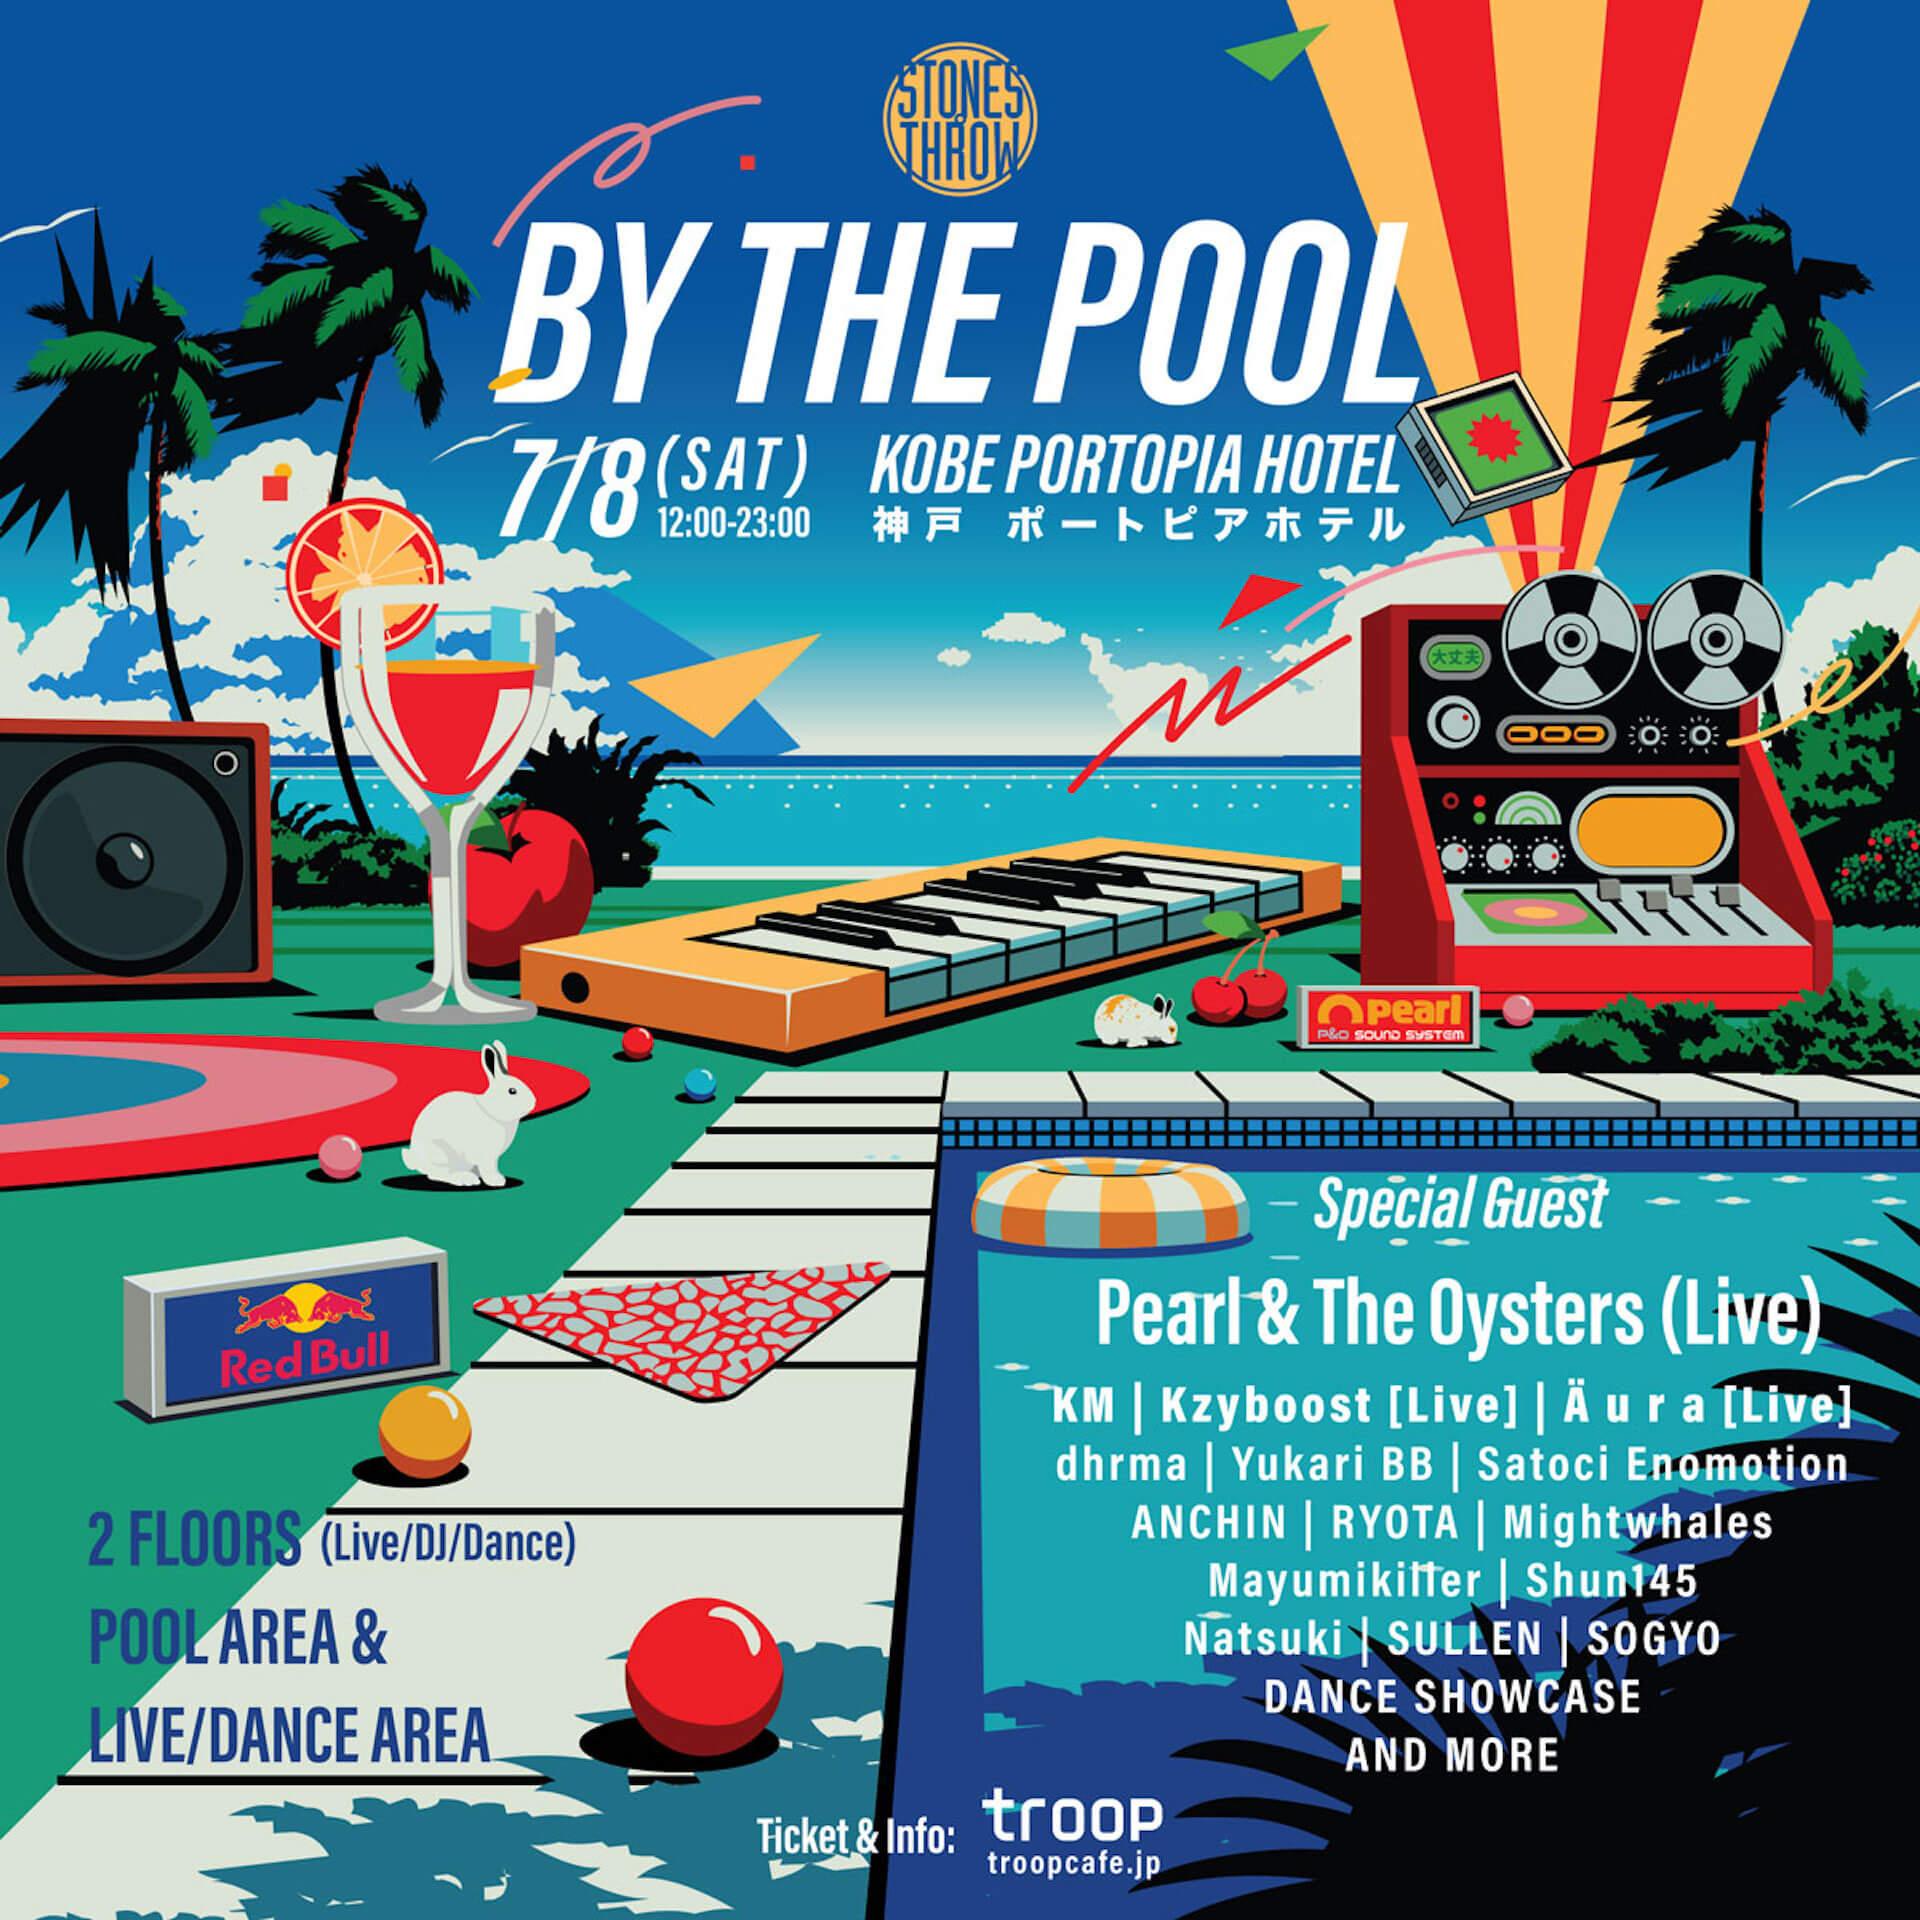 Pearl & The Oystersが初来日！〈Stones Throw〉の人気パーティ「By The Pool」が神戸ポートピアホテルで今年も開催 music230510-bythepool5